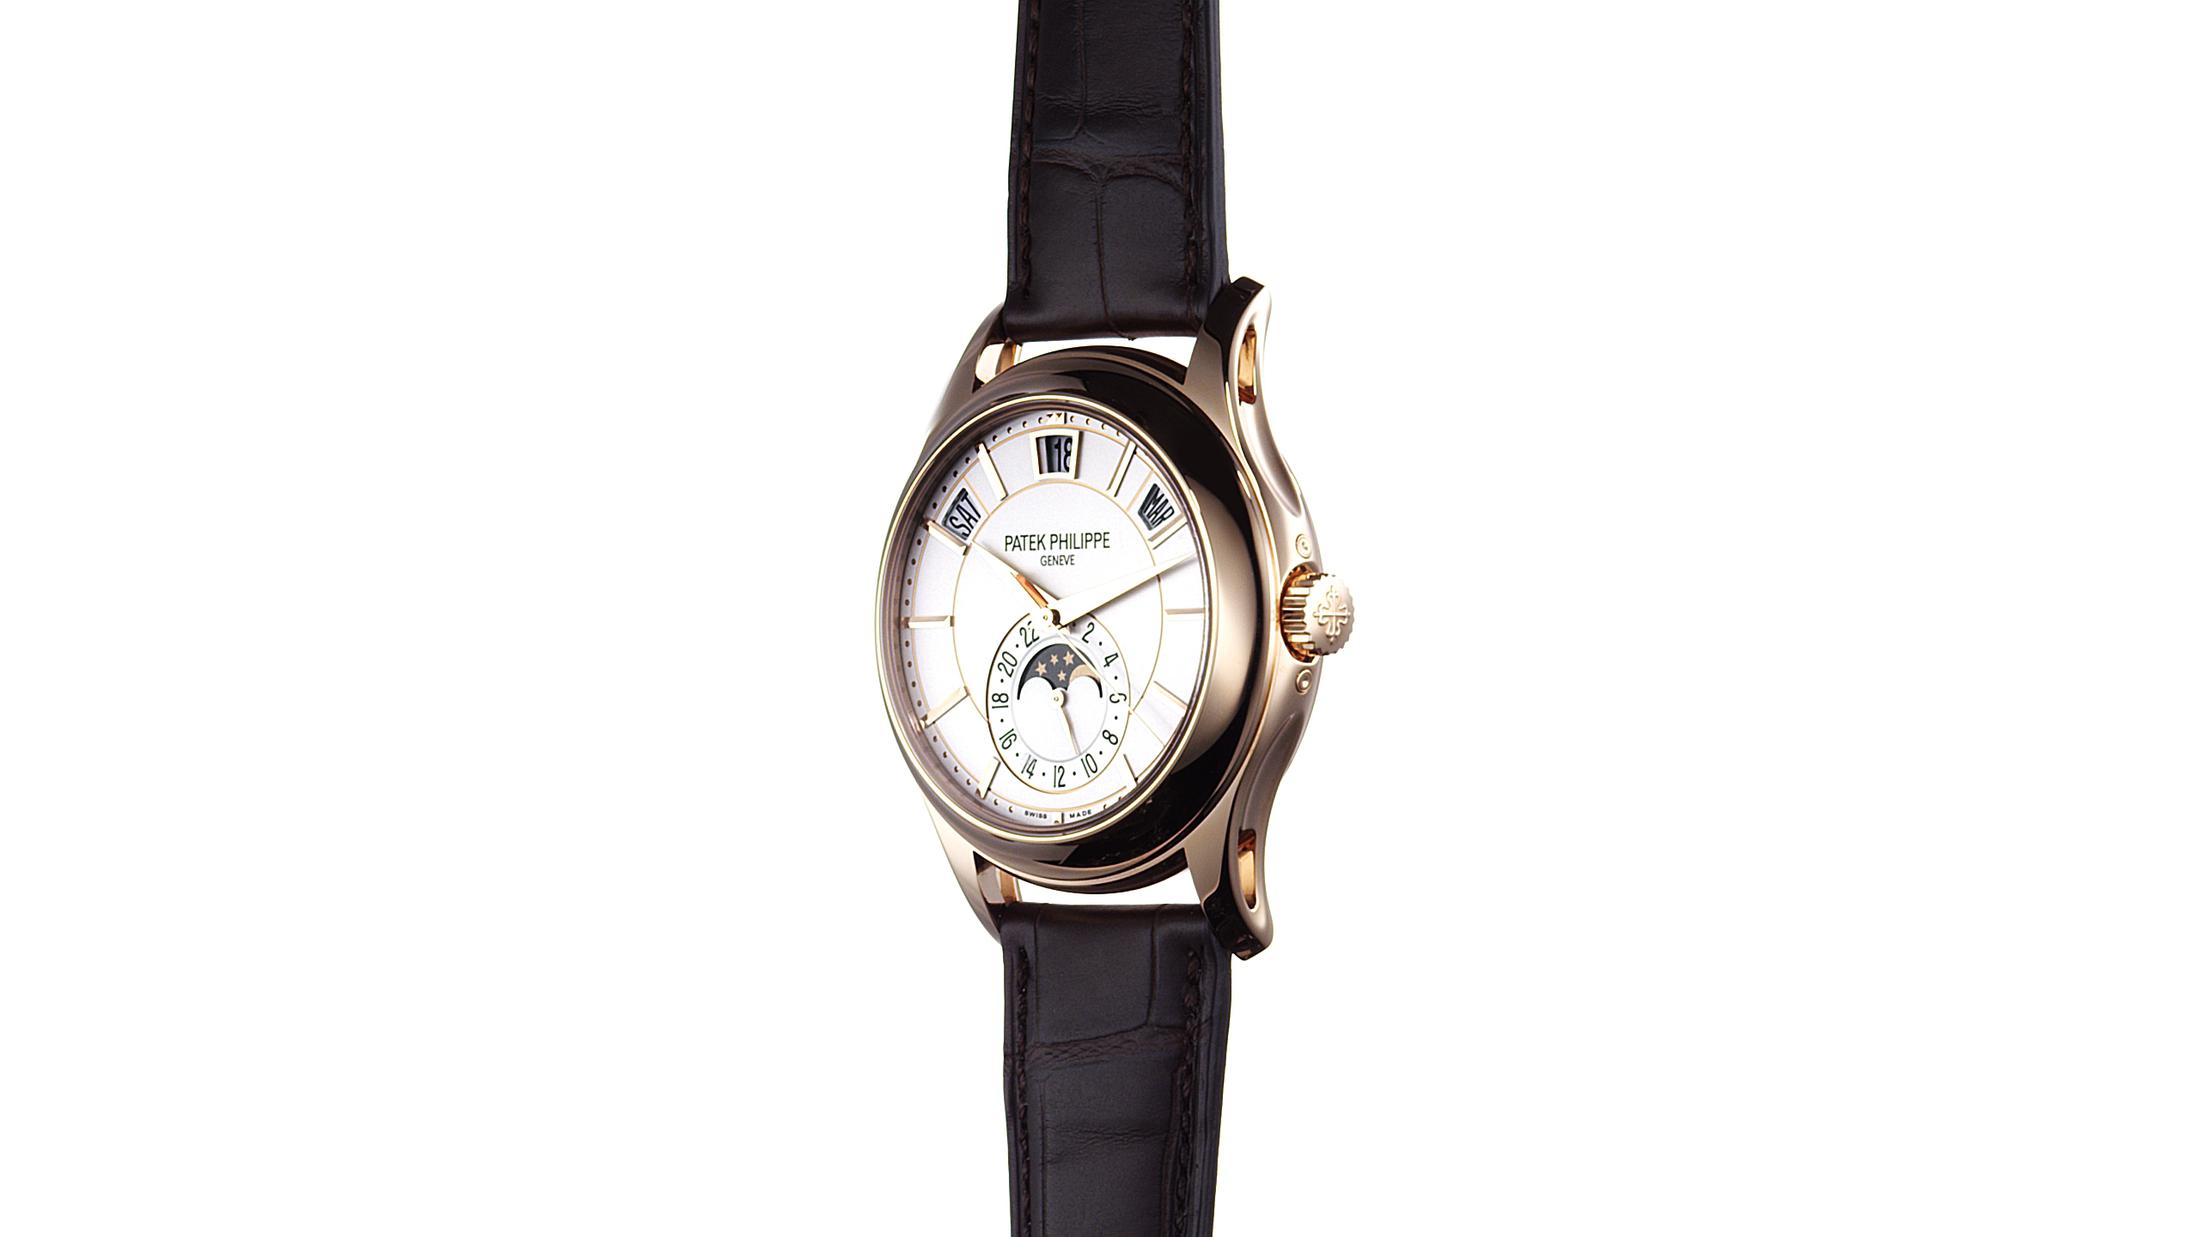 Patek Philippe Travel Time Grand Complication White Gold 5524G-001